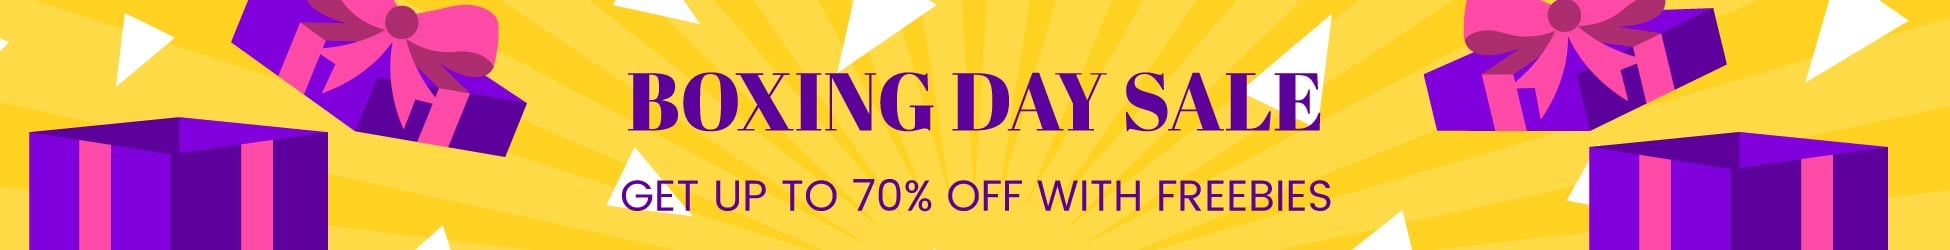 Boxing Day Website Banner